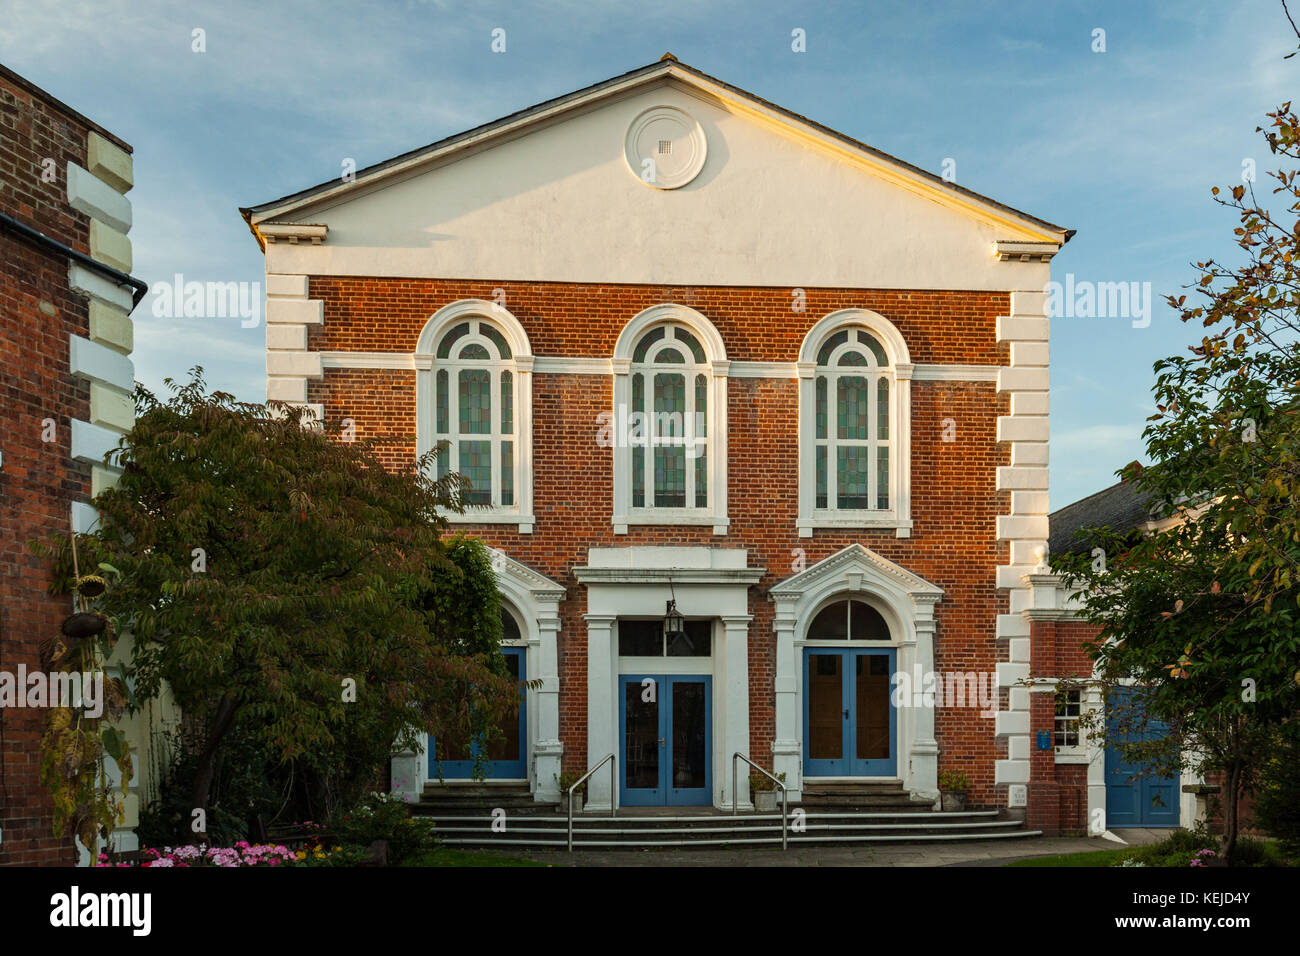 United Reformed Church in Dorking, Surrey, England. Stock Photo